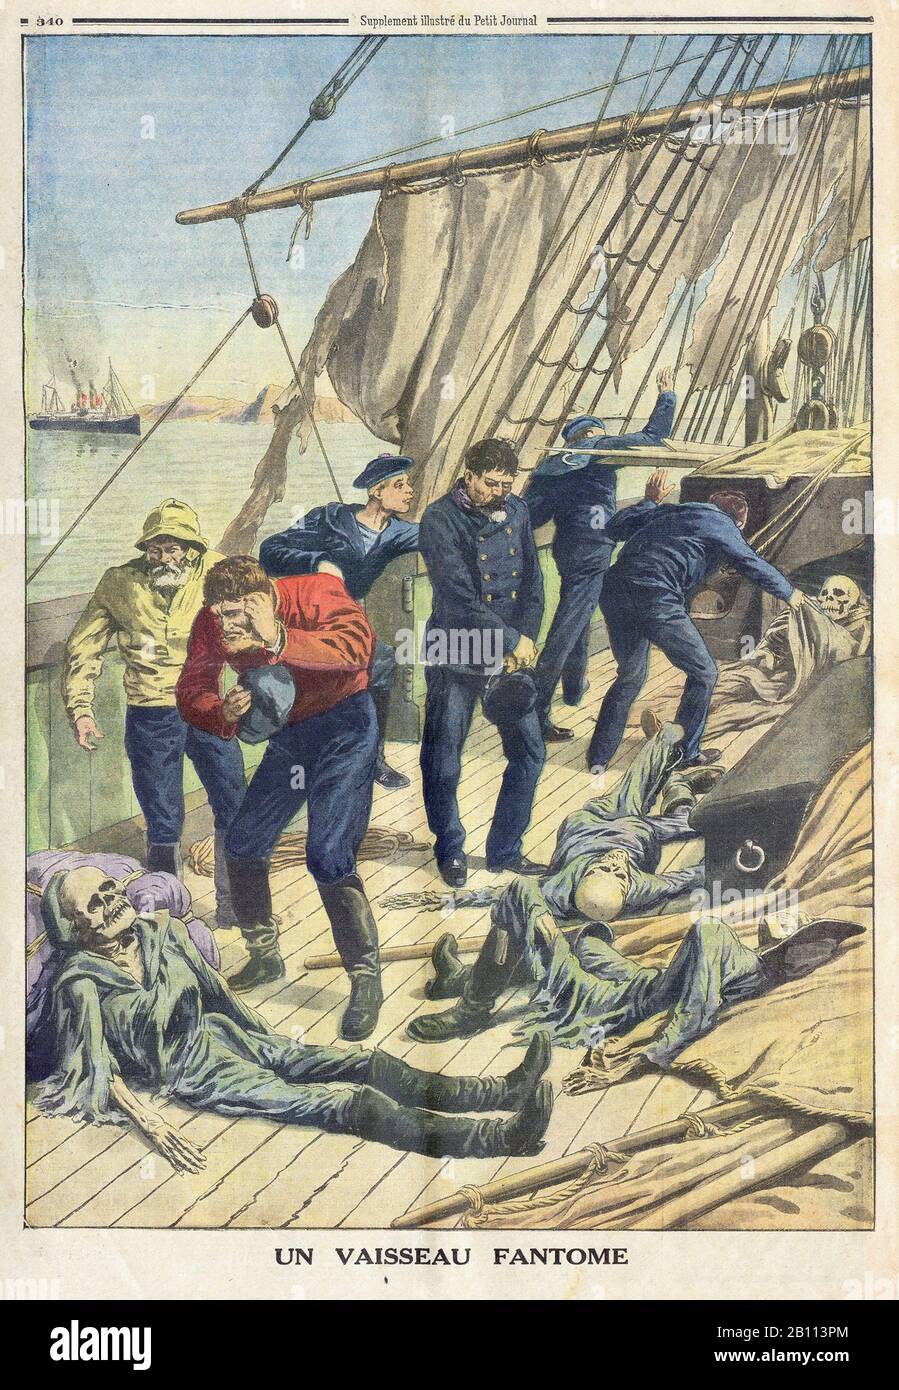 UN VAISSEAU FANTOME - A FANTOME SHIP - In 'Le Petit Journal' French Illustrated newspaper Stock Photo